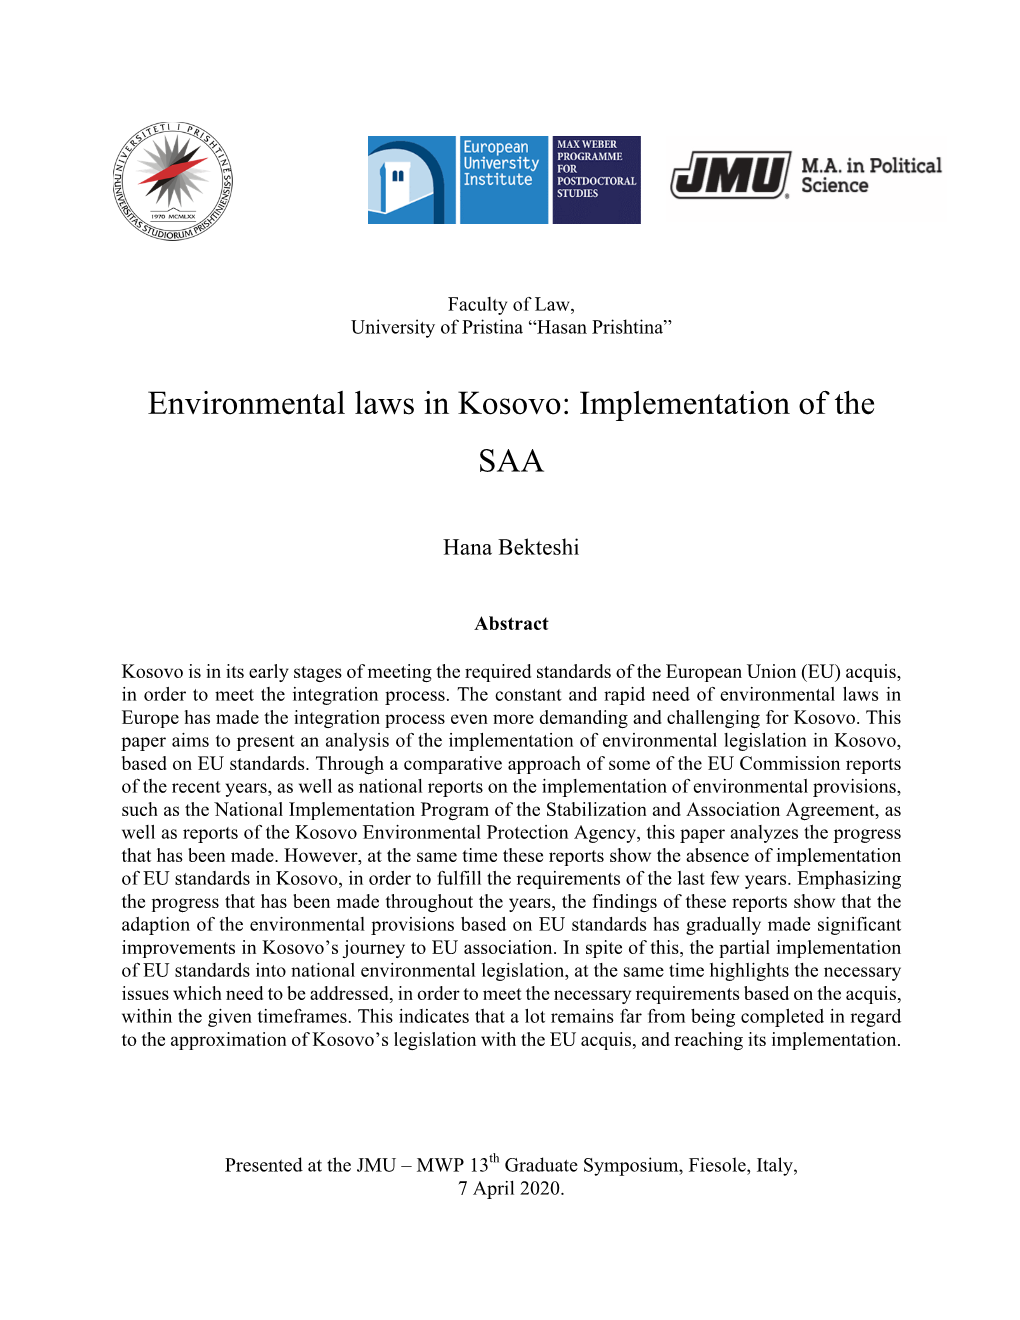 Environmental Laws in Kosovo: Implementation of the SAA